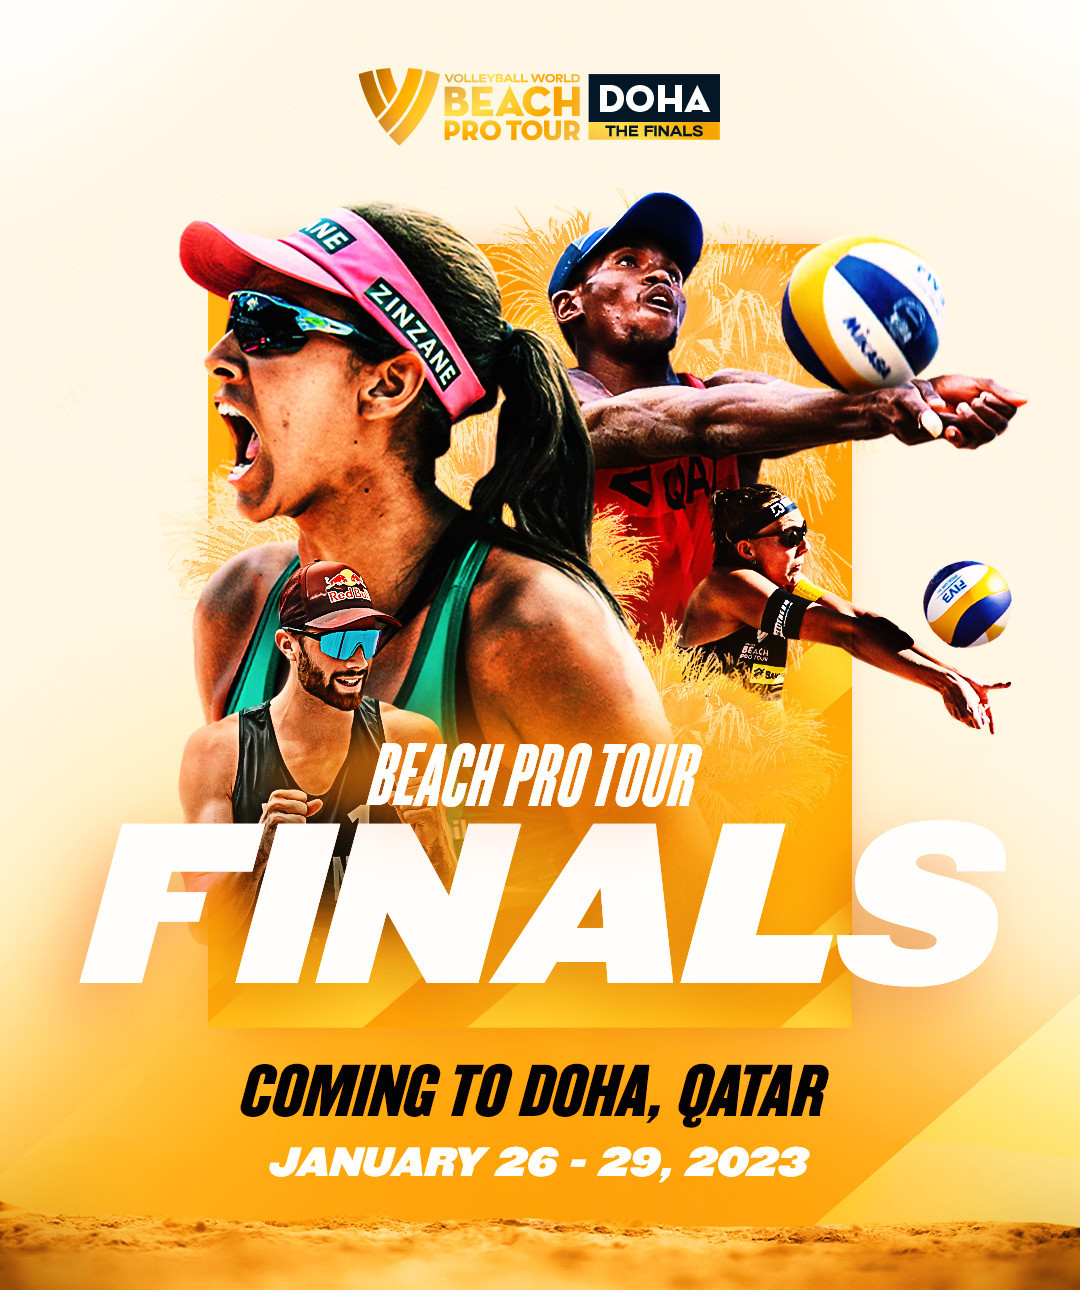 Doha is set to stage the Beach Pro Tour Finals for three consecutive years ©Volleyball World